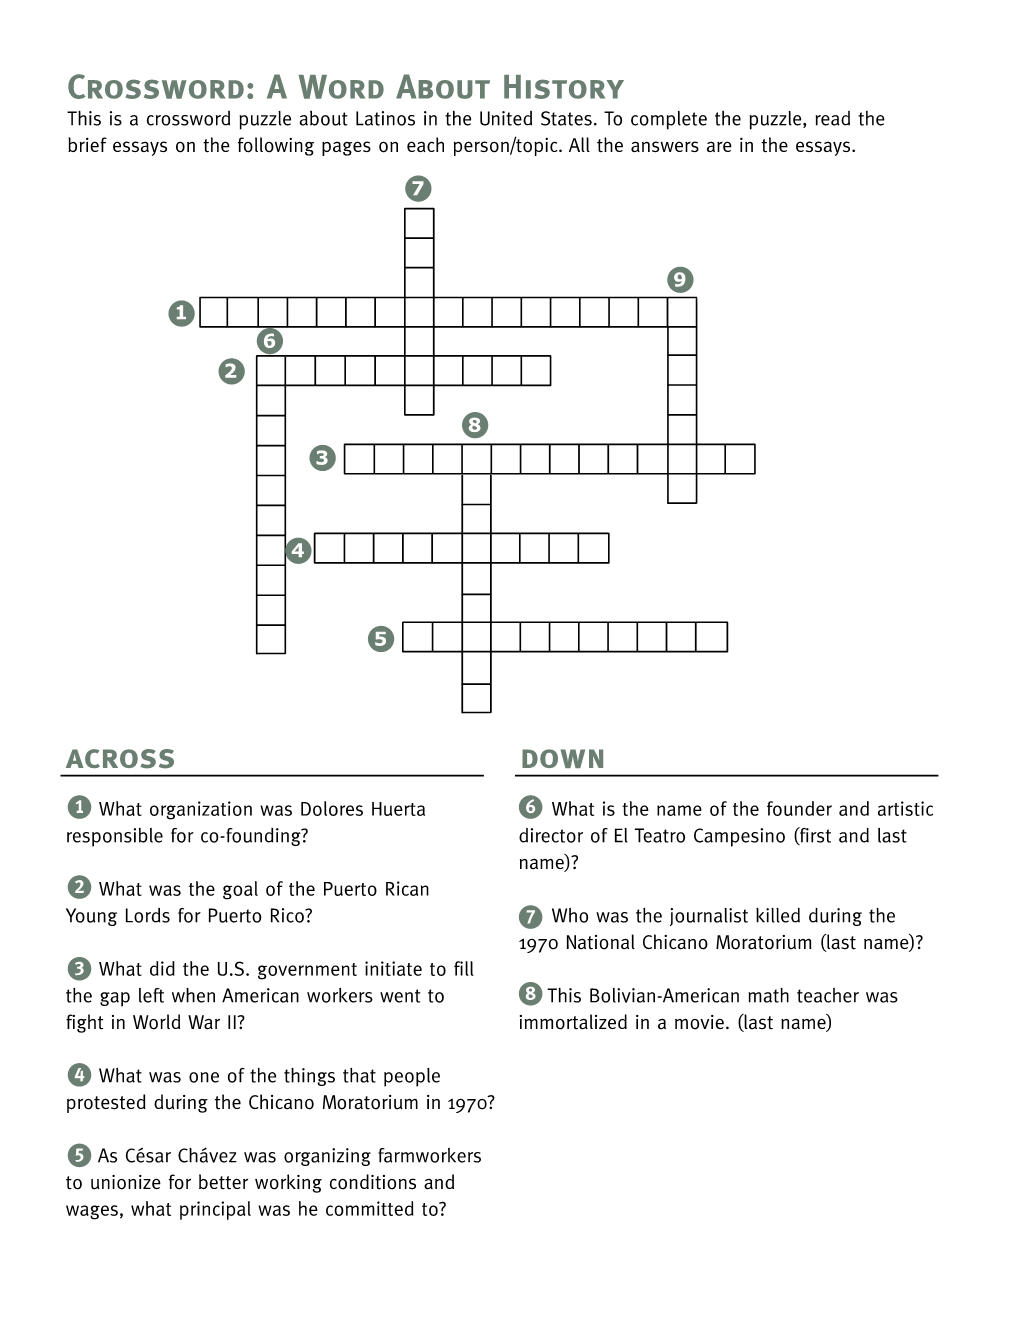 Crossword: a Word About History This Is a Crossword Puzzle About Latinos in the United States